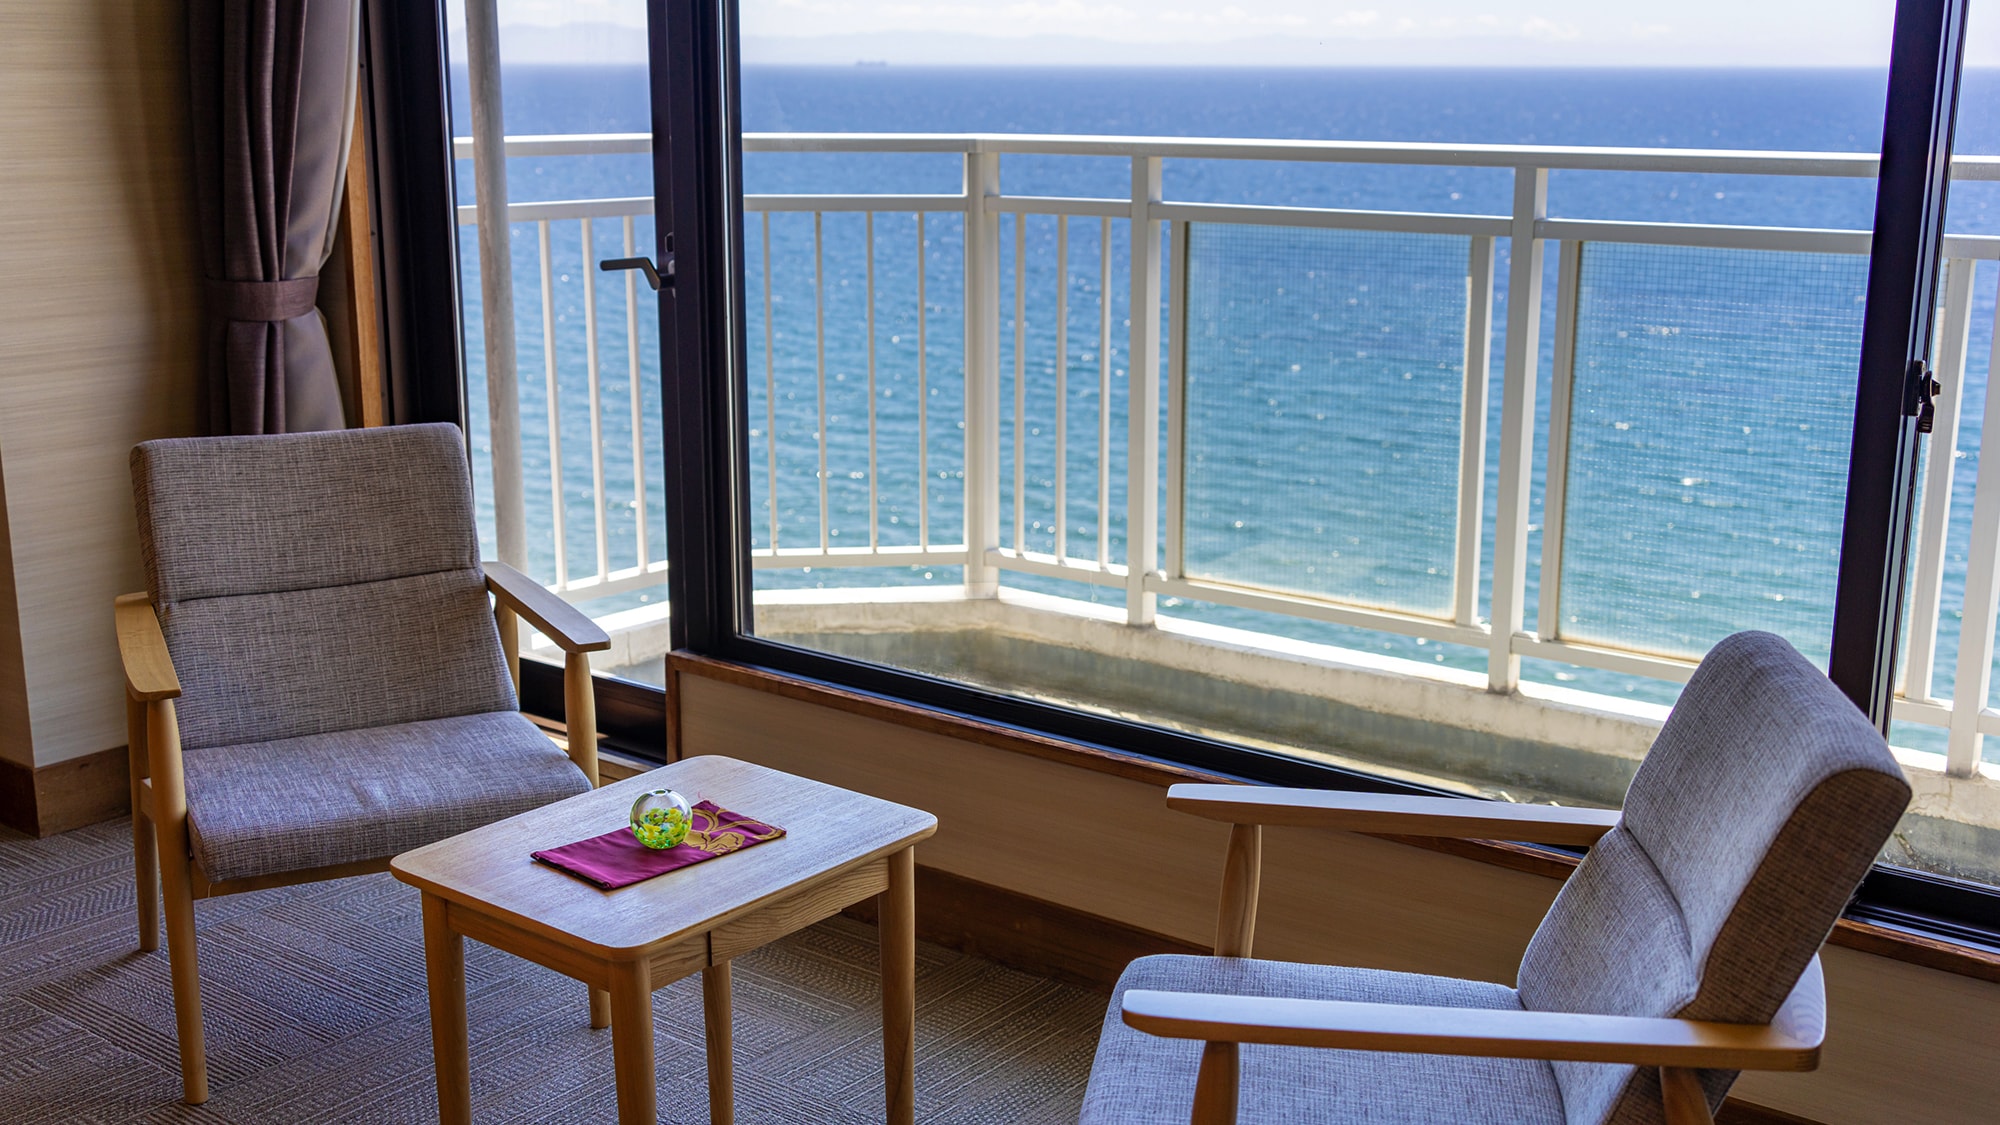 You can greet a refreshing awakening with a view of the glittering sea.